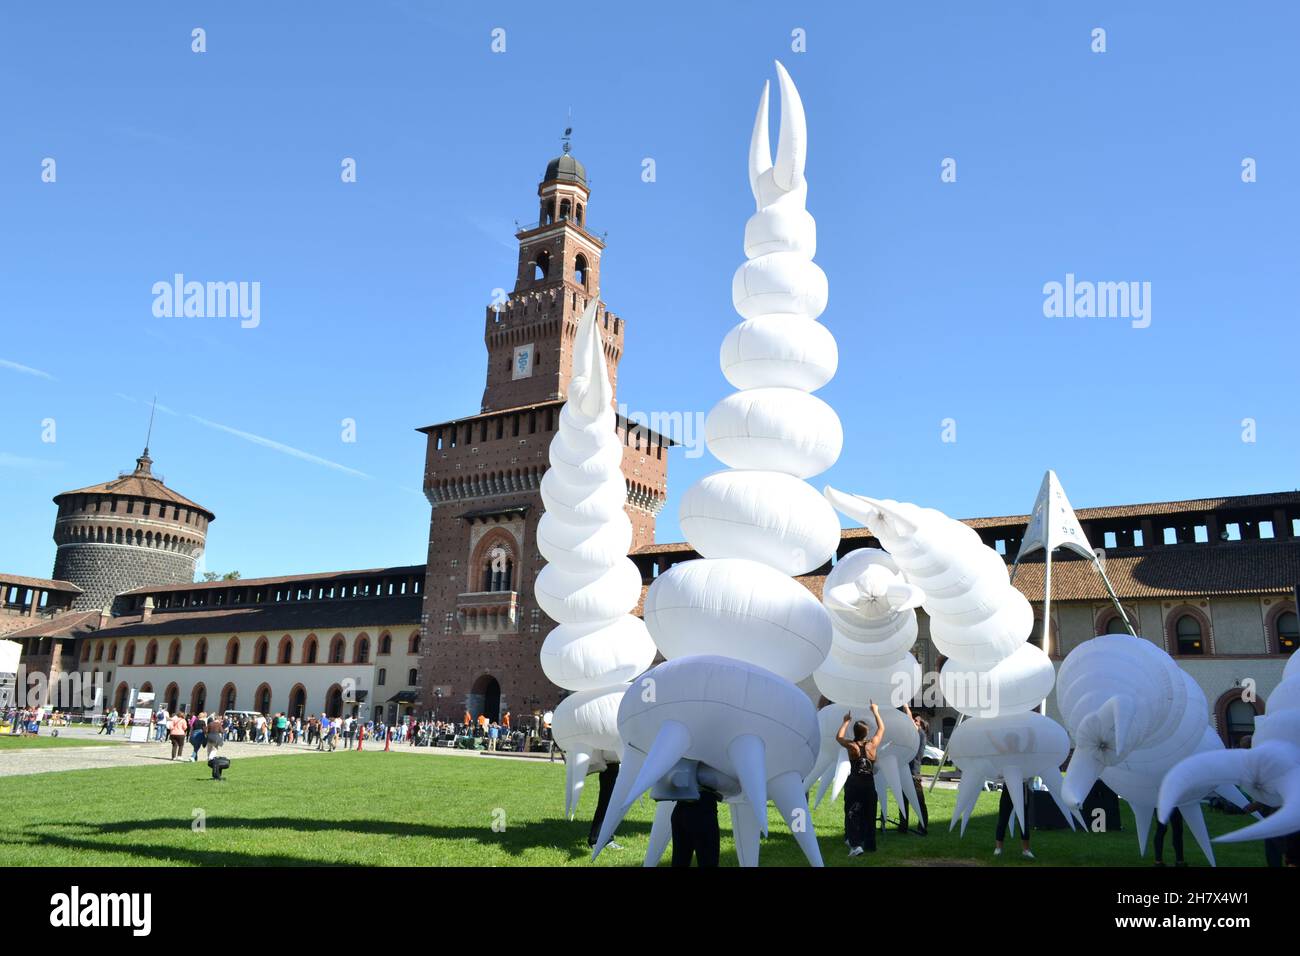 Milan, Italy - September 25, 2015: Participants of the Strà Festival of the Street Arts are Preparing Their Flying Giant Paper Caterpillar Models. Stock Photo